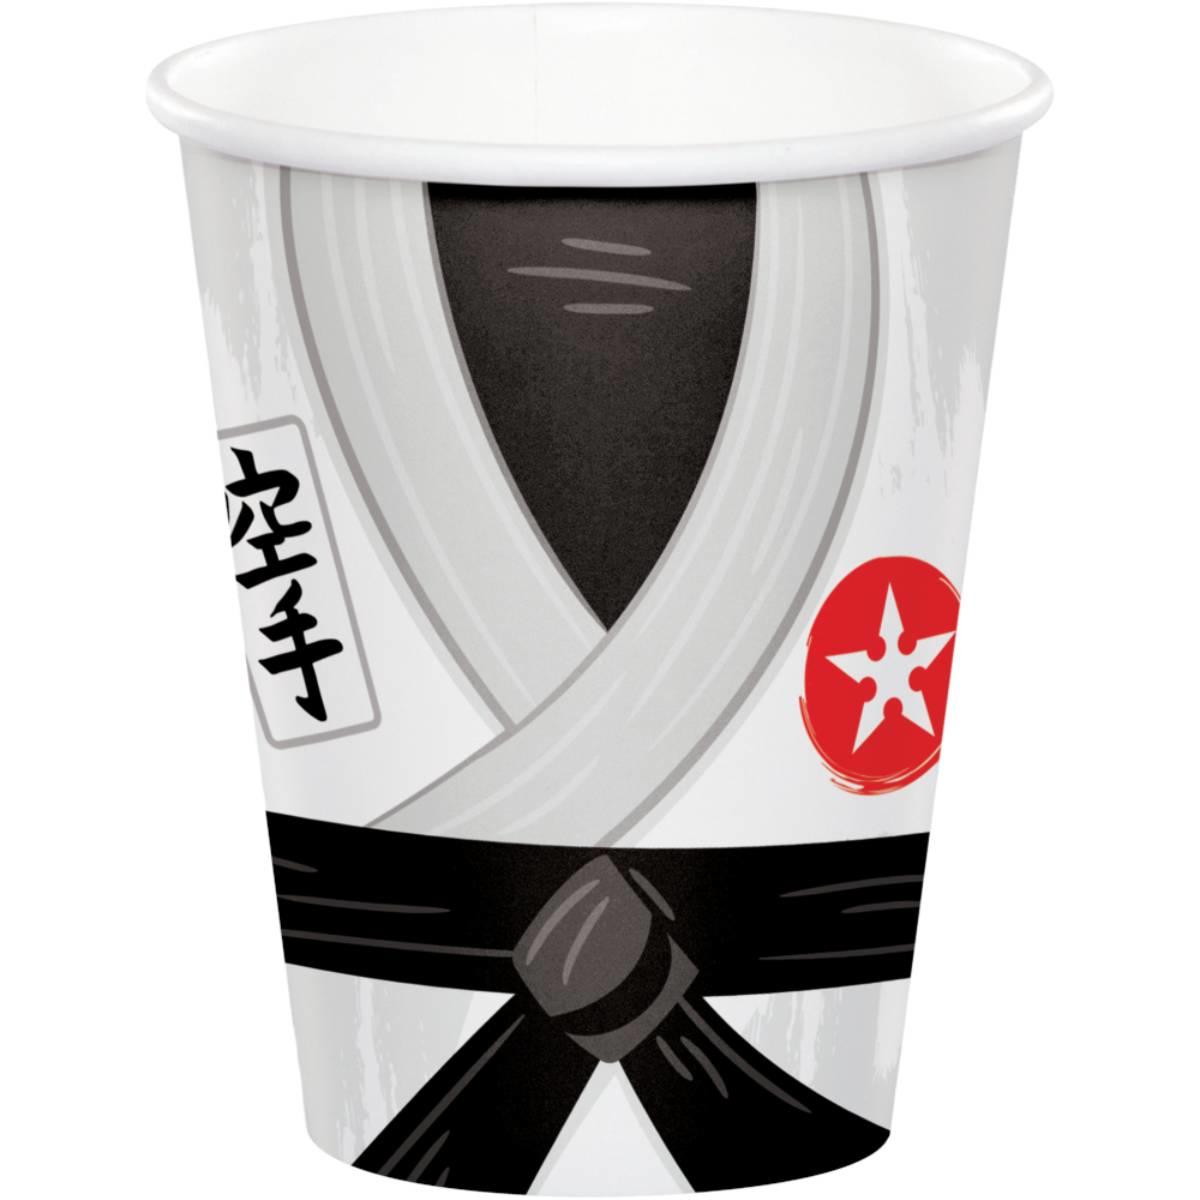 Karate Party Cups pk8 by Creative Converting 346247 available here at Karnival Costumes online party shop